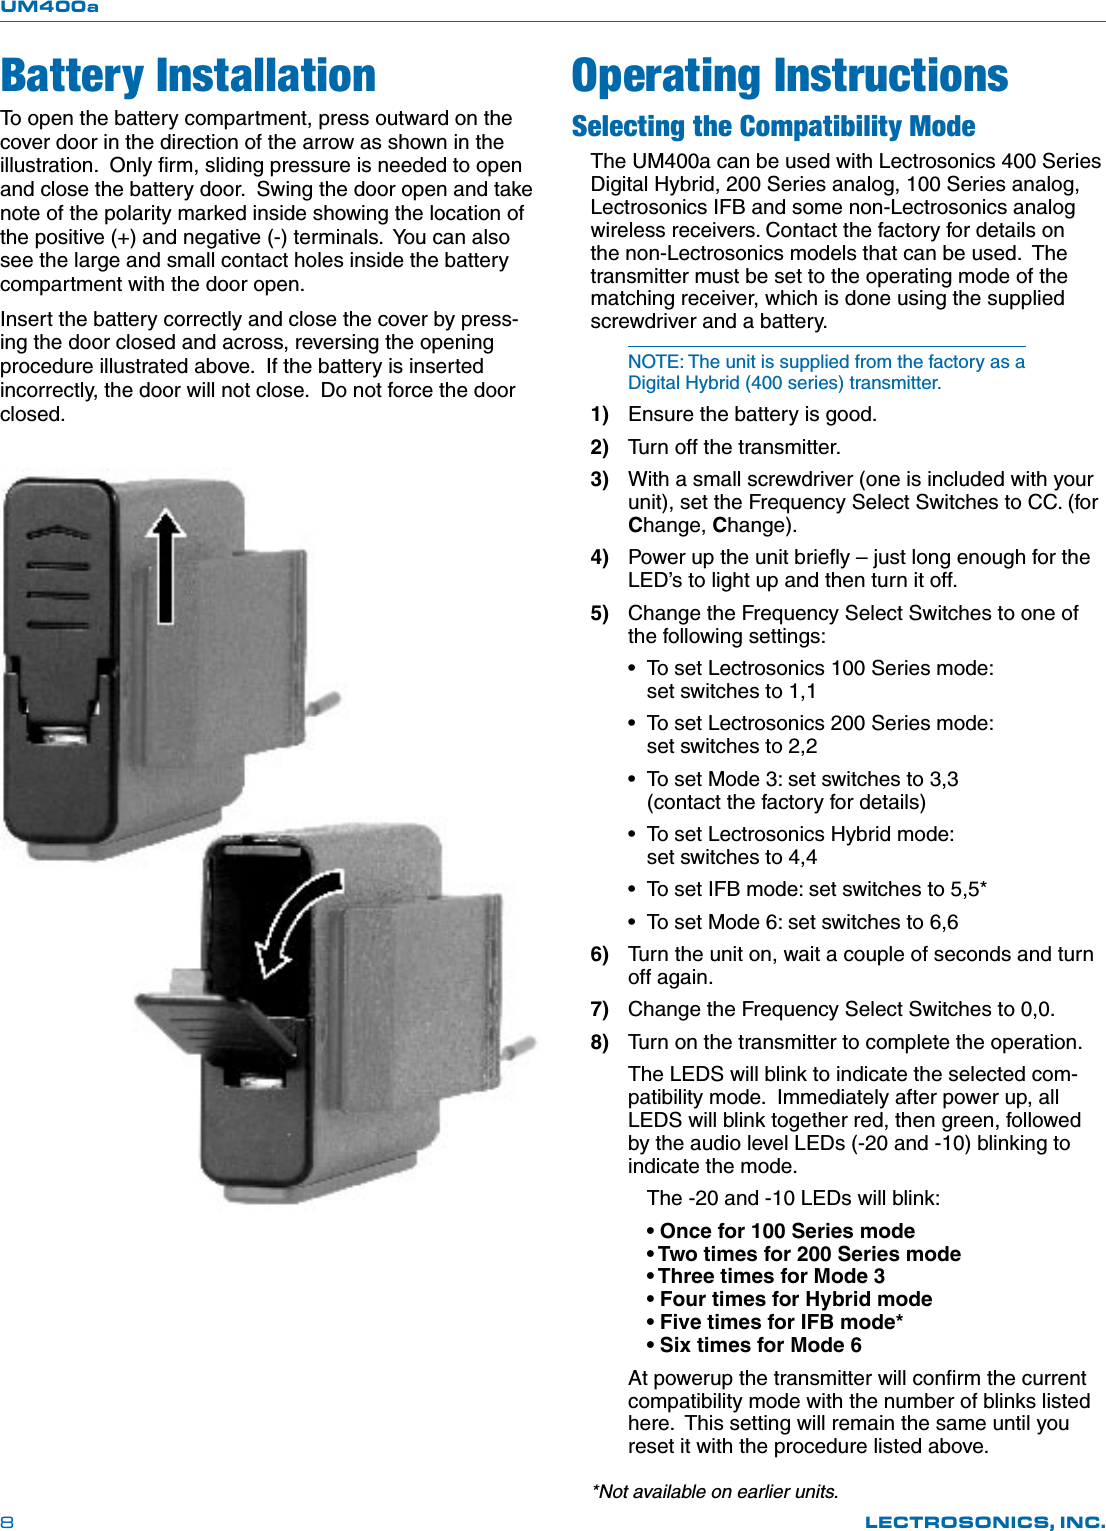 UM400aLECTROSONICS, INC.8To open the battery compartment, press outward on the cover door in the direction of the arrow as shown in the illustration.  Only ﬁrm, sliding pressure is needed to open and close the battery door.  Swing the door open and take note of the polarity marked inside showing the location of the positive (+) and negative (-) terminals.  You can also see the large and small contact holes inside the battery compartment with the door open.Insert the battery correctly and close the cover by press-ing the door closed and across, reversing the opening procedure illustrated above.  If the battery is inserted incorrectly, the door will not close.  Do not force the door closed.*Not available on earlier units.Battery InstallationSelecting the Compatibility ModeThe UM400a can be used with Lectrosonics 400 Series Digital Hybrid, 200 Series analog, 100 Series analog, Lectrosonics IFB and some non-Lectrosonics analog wireless receivers. Contact the factory for details on the non-Lectrosonics models that can be used.  The transmitter must be set to the operating mode of the matching receiver, which is done using the supplied screwdriver and a battery.NOTE: The unit is supplied from the factory as a Digital Hybrid (400 series) transmitter.1)  Ensure the battery is good.2)  Turn off the transmitter.3)  With a small screwdriver (one is included with your unit), set the Frequency Select Switches to CC. (for Change, Change).    4)  Power up the unit brieﬂy – just long enough for the LED’s to light up and then turn it off.5)  Change the Frequency Select Switches to one of the following settings:•  To set Lectrosonics 100 Series mode:       set switches to 1,1•  To set Lectrosonics 200 Series mode:       set switches to 2,2•  To set Mode 3: set switches to 3,3    (contact the factory for details)•  To set Lectrosonics Hybrid mode:    set switches to 4,4•  To set IFB mode: set switches to 5,5*•  To set Mode 6: set switches to 6,66)  Turn the unit on, wait a couple of seconds and turn off again.7)  Change the Frequency Select Switches to 0,0.8)  Turn on the transmitter to complete the operation.The LEDS will blink to indicate the selected com-patibility mode.  Immediately after power up, all LEDS will blink together red, then green, followed by the audio level LEDs (-20 and -10) blinking to indicate the mode.  The -20 and -10 LEDs will blink:  • Once for 100 Series mode   • Two times for 200 Series mode   • Three times for Mode 3   • Four times for Hybrid mode   • Five times for IFB mode*   • Six times for Mode 6At powerup the transmitter will conﬁrm the current compatibility mode with the number of blinks listed here.  This setting will remain the same until you reset it with the procedure listed above. Operating Instructions